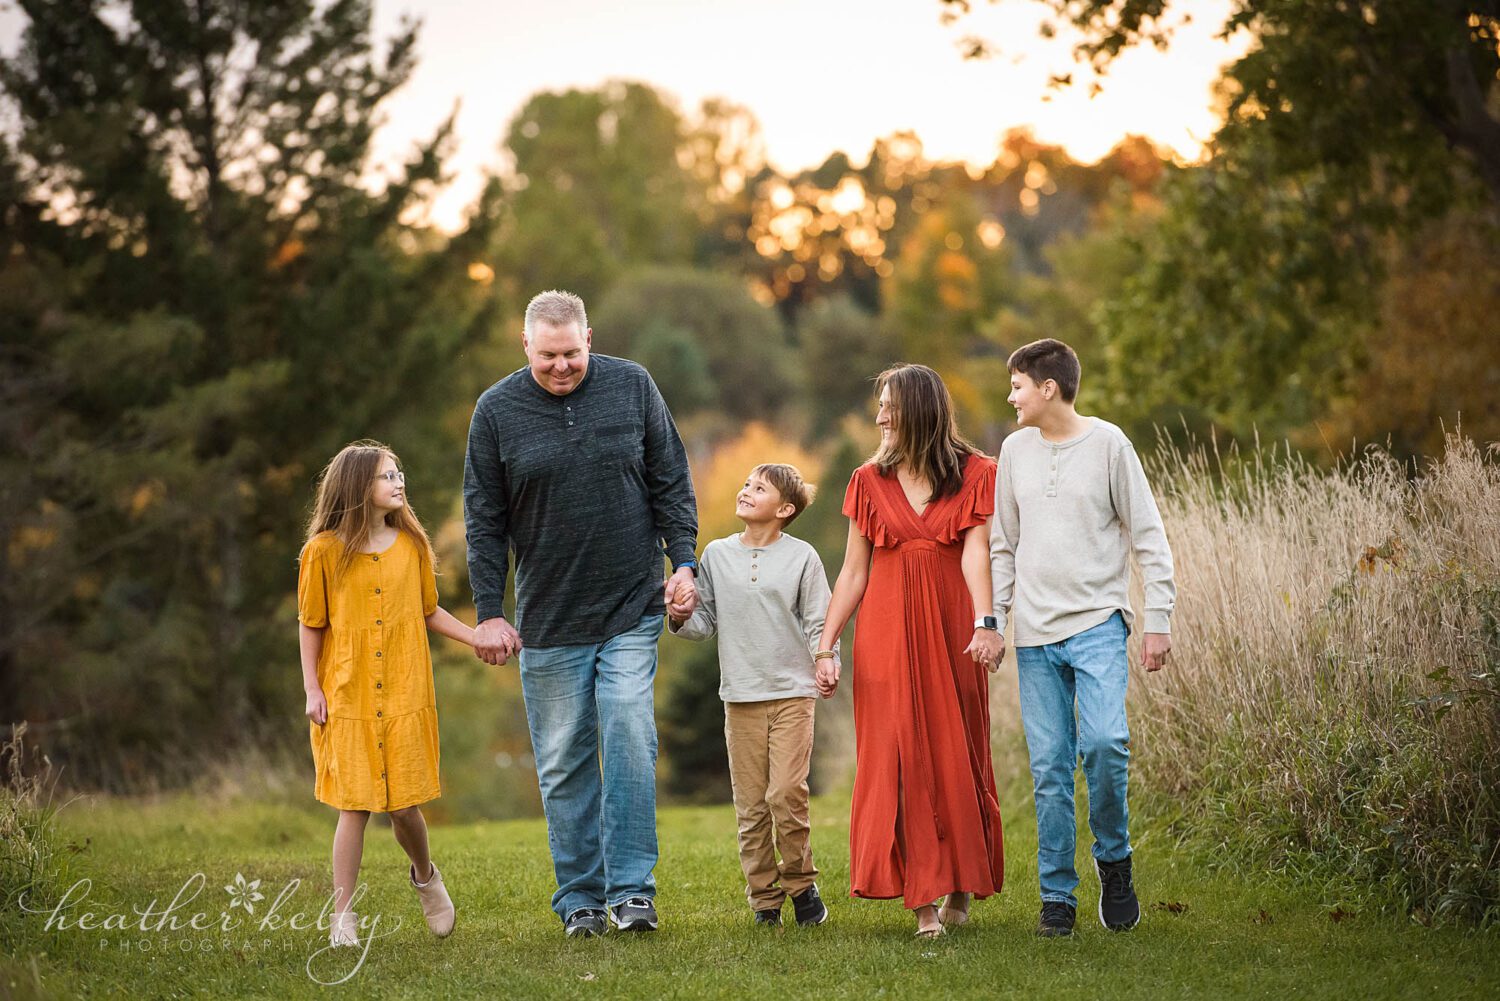 brookfield area family photography. Family of 5 at sunset holding hands and looking at each other.